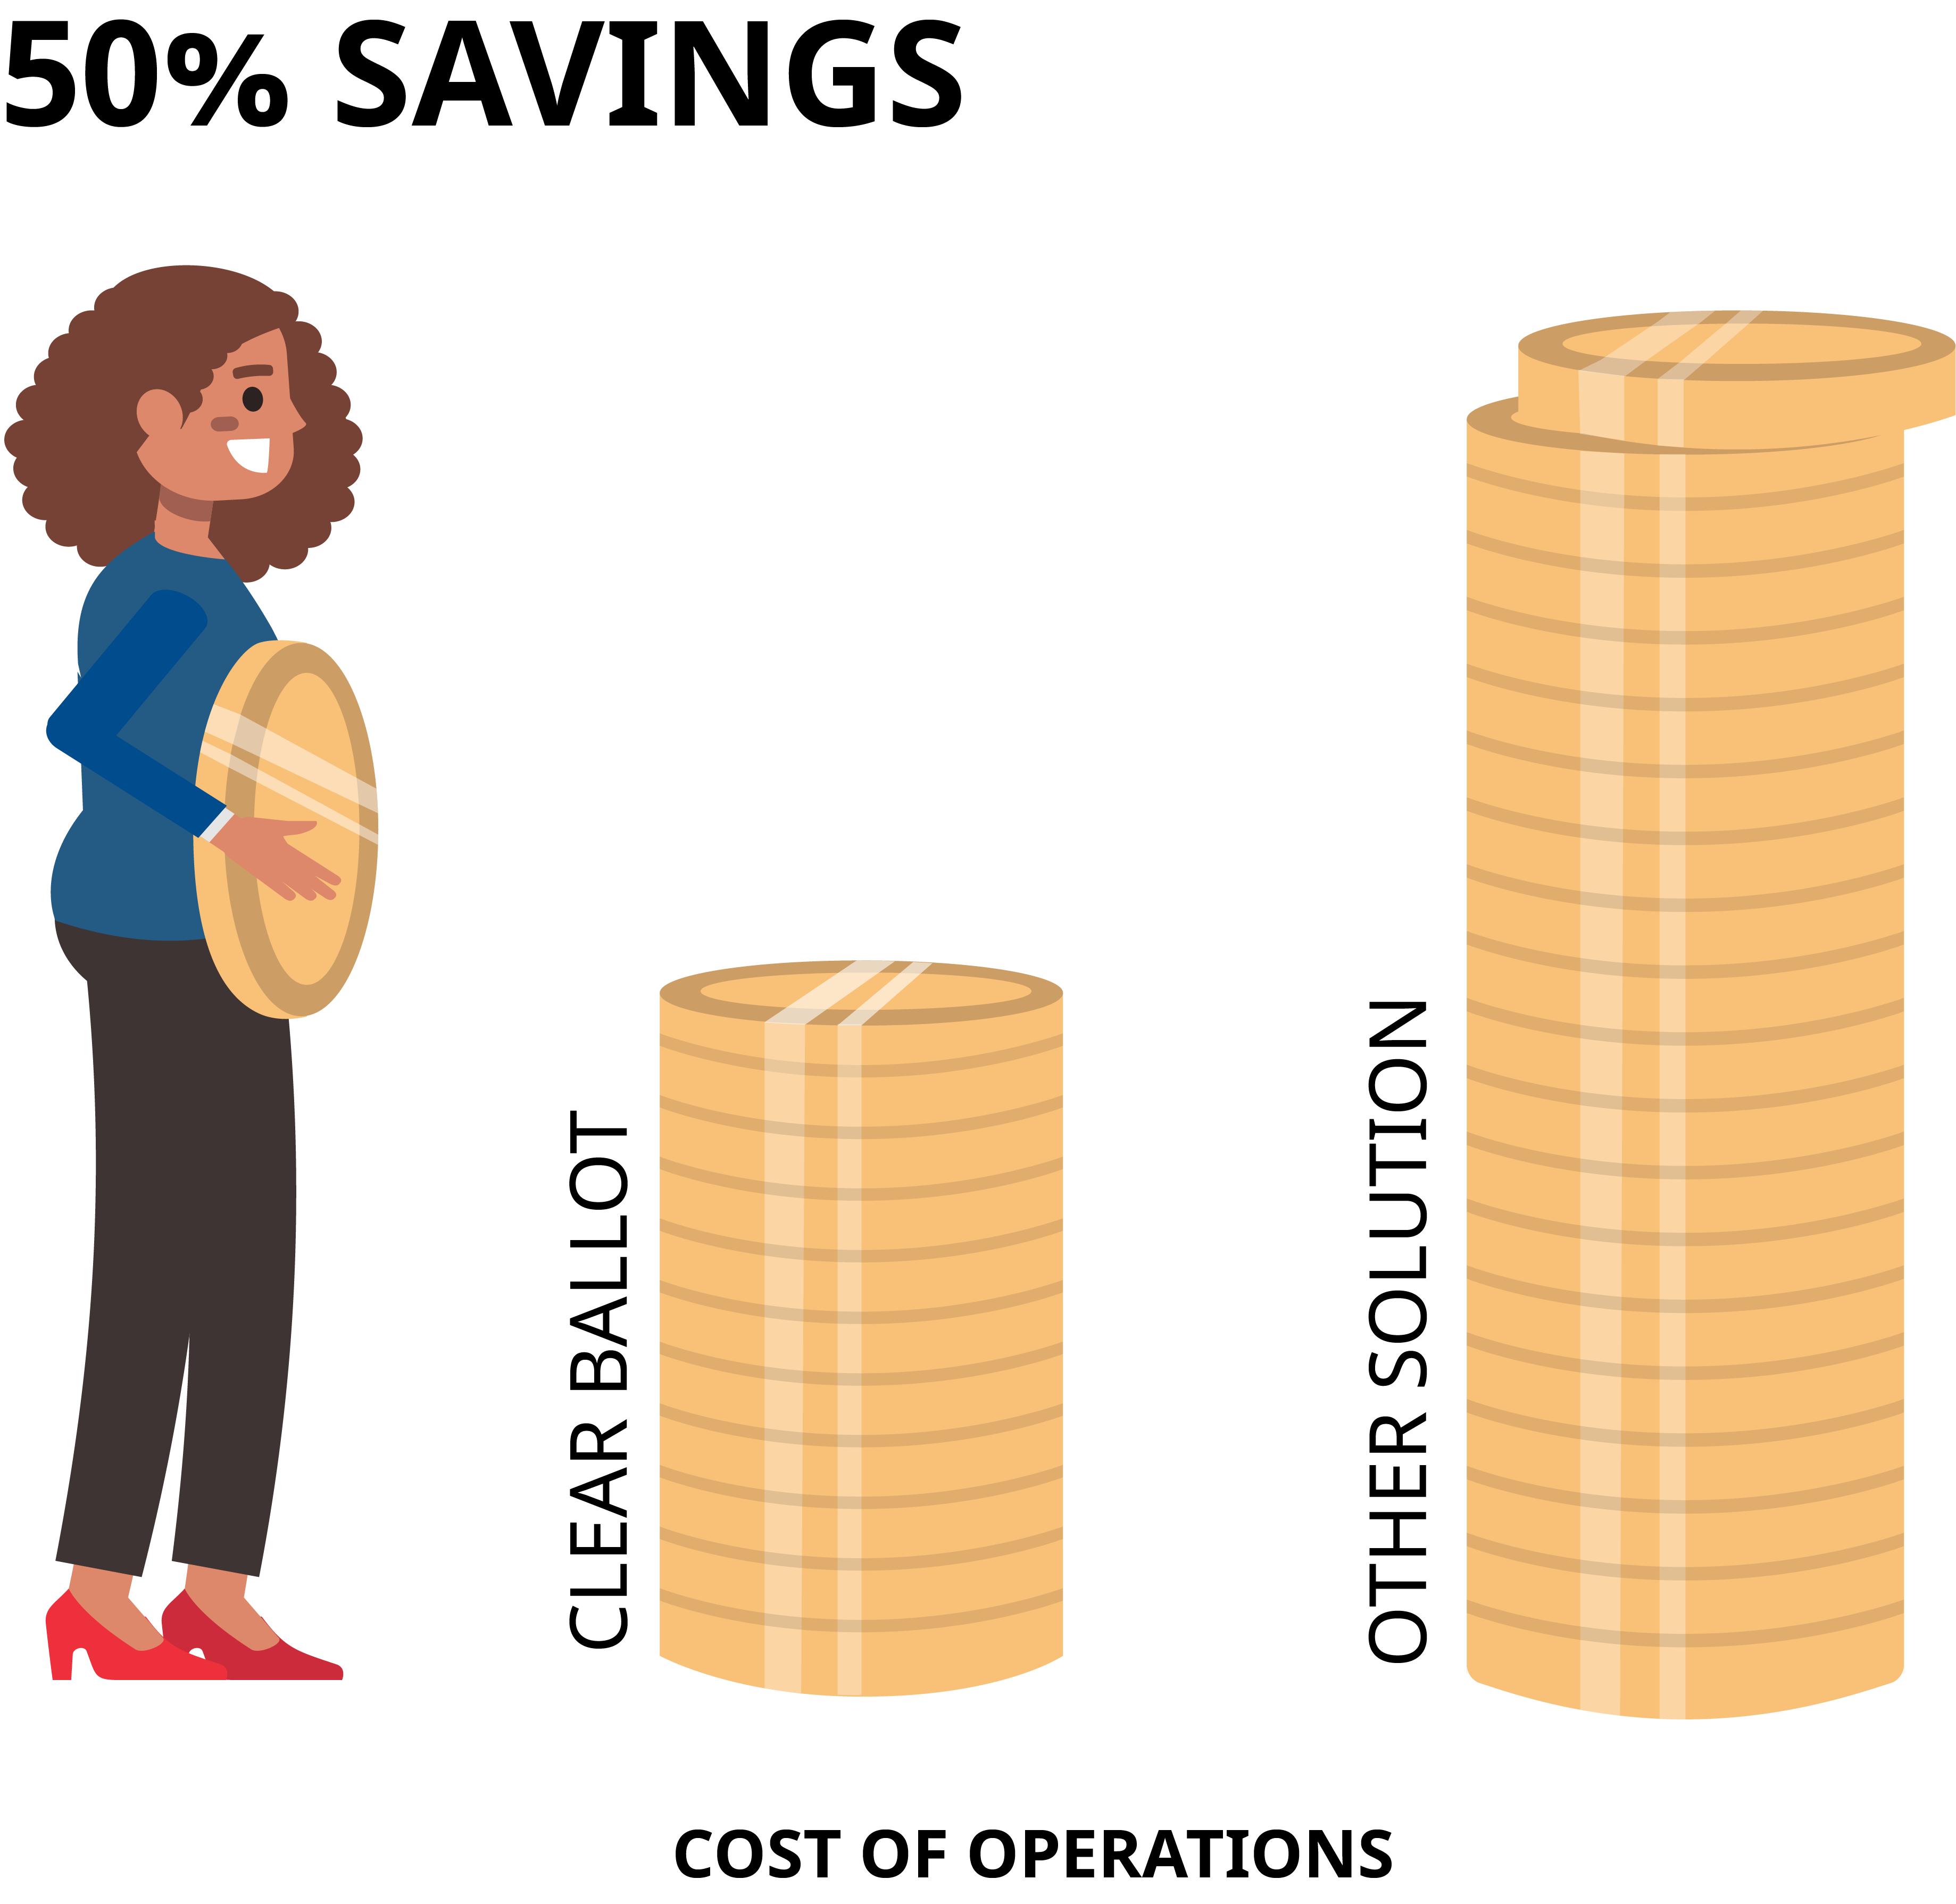 Cartoon woman holding giant coin next to stacks of coins showing a 50% cost savings